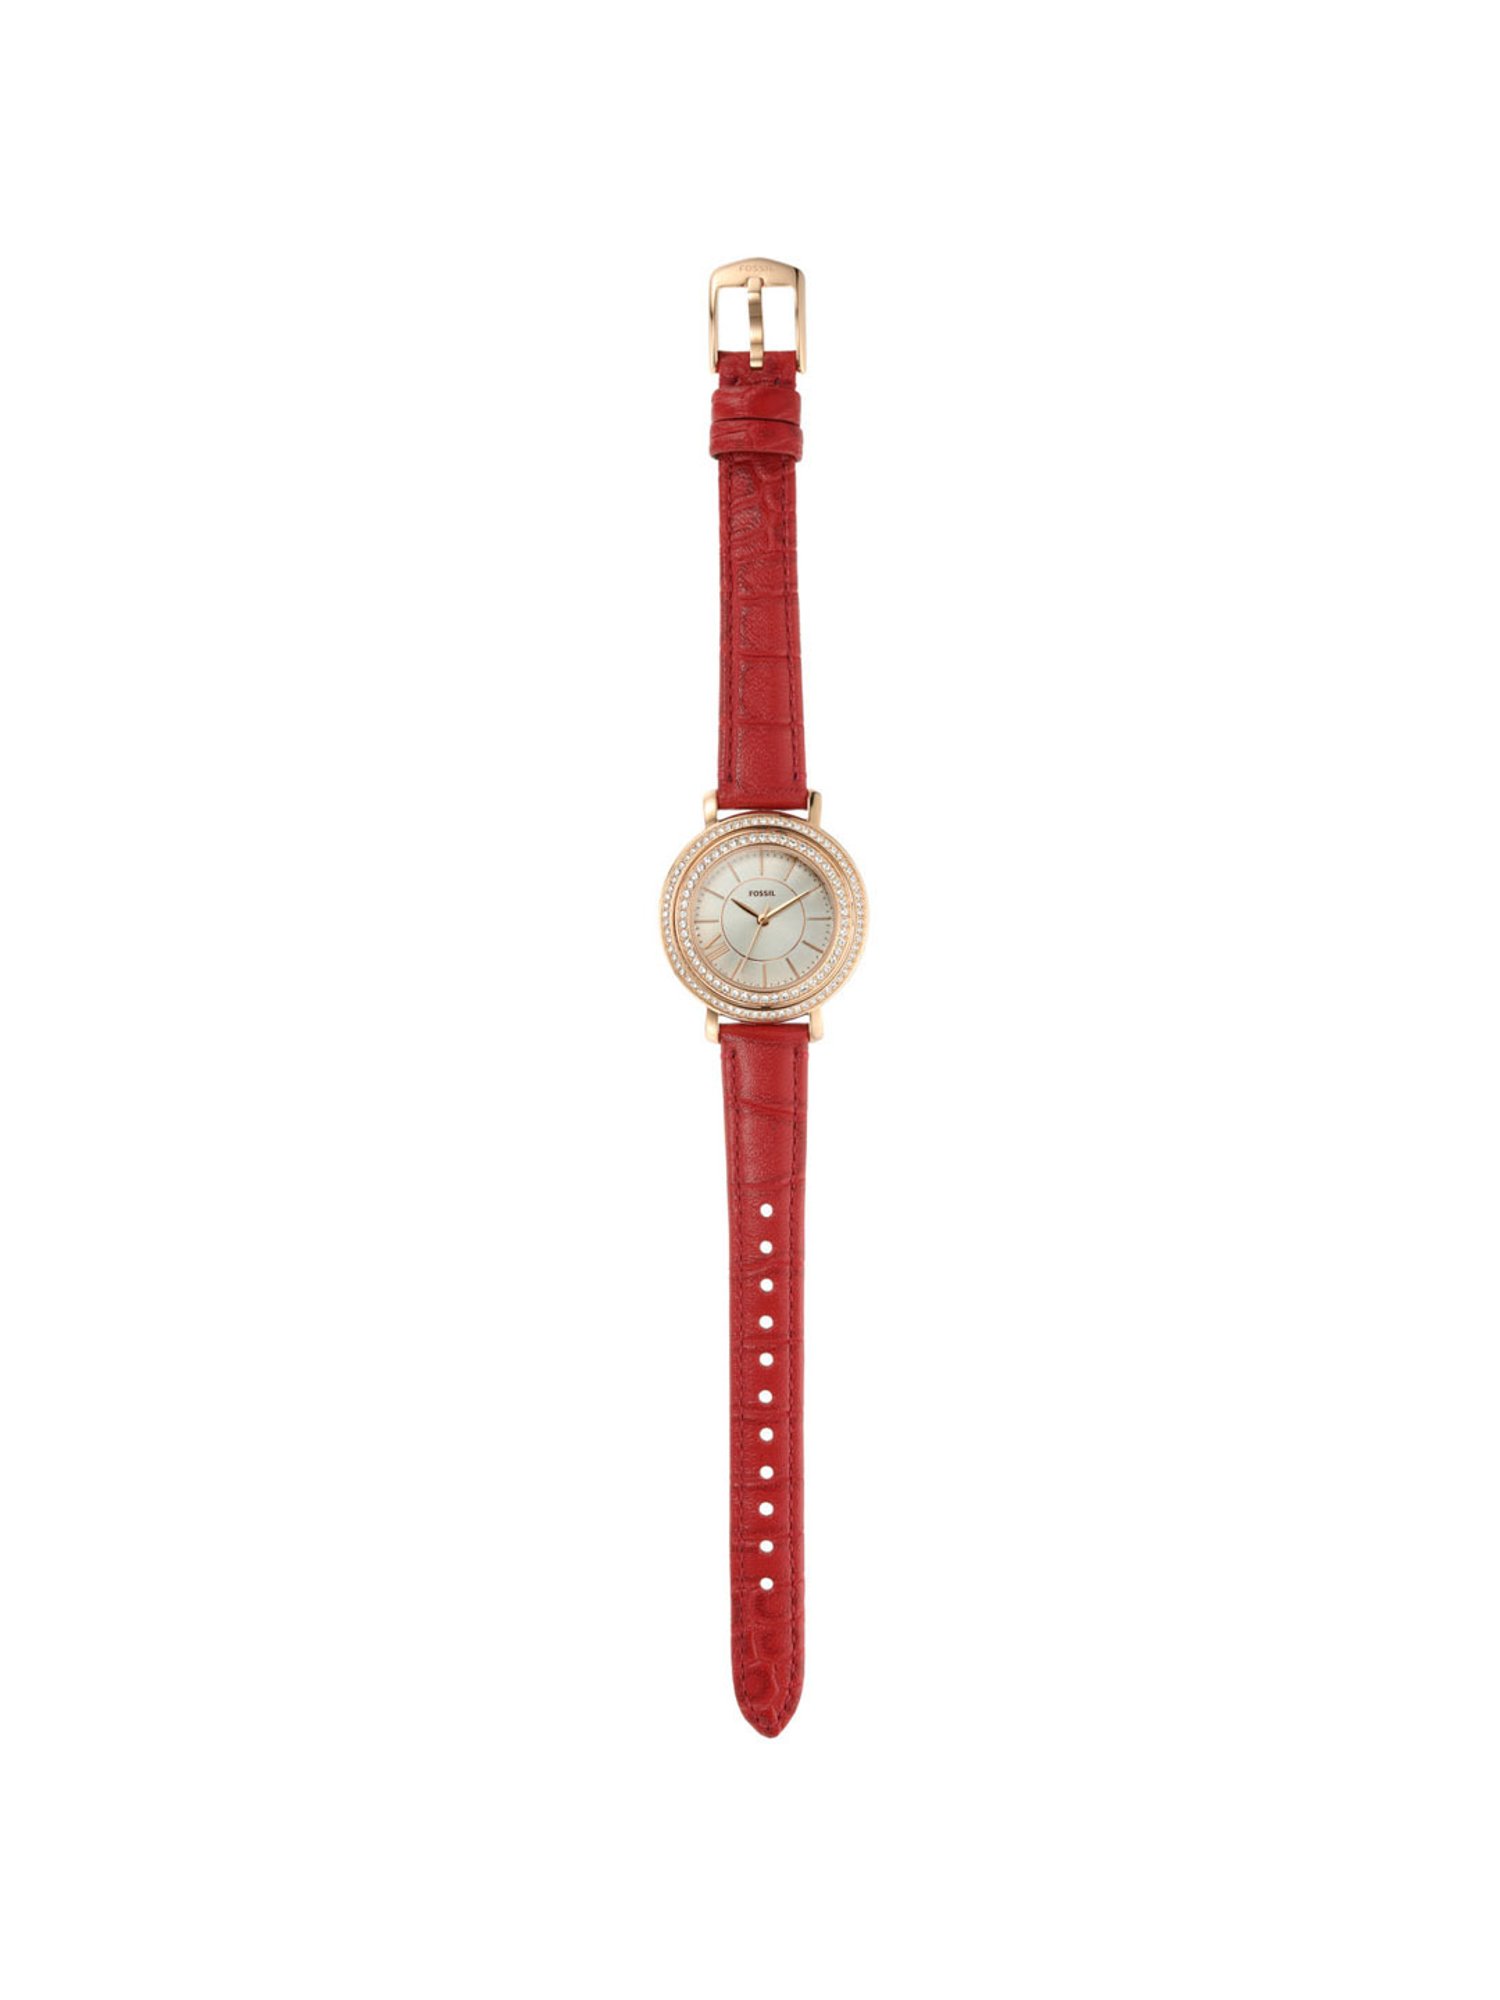 Buy Fossil Jacqueline ES5248 Analog Watch for Women at Best Price